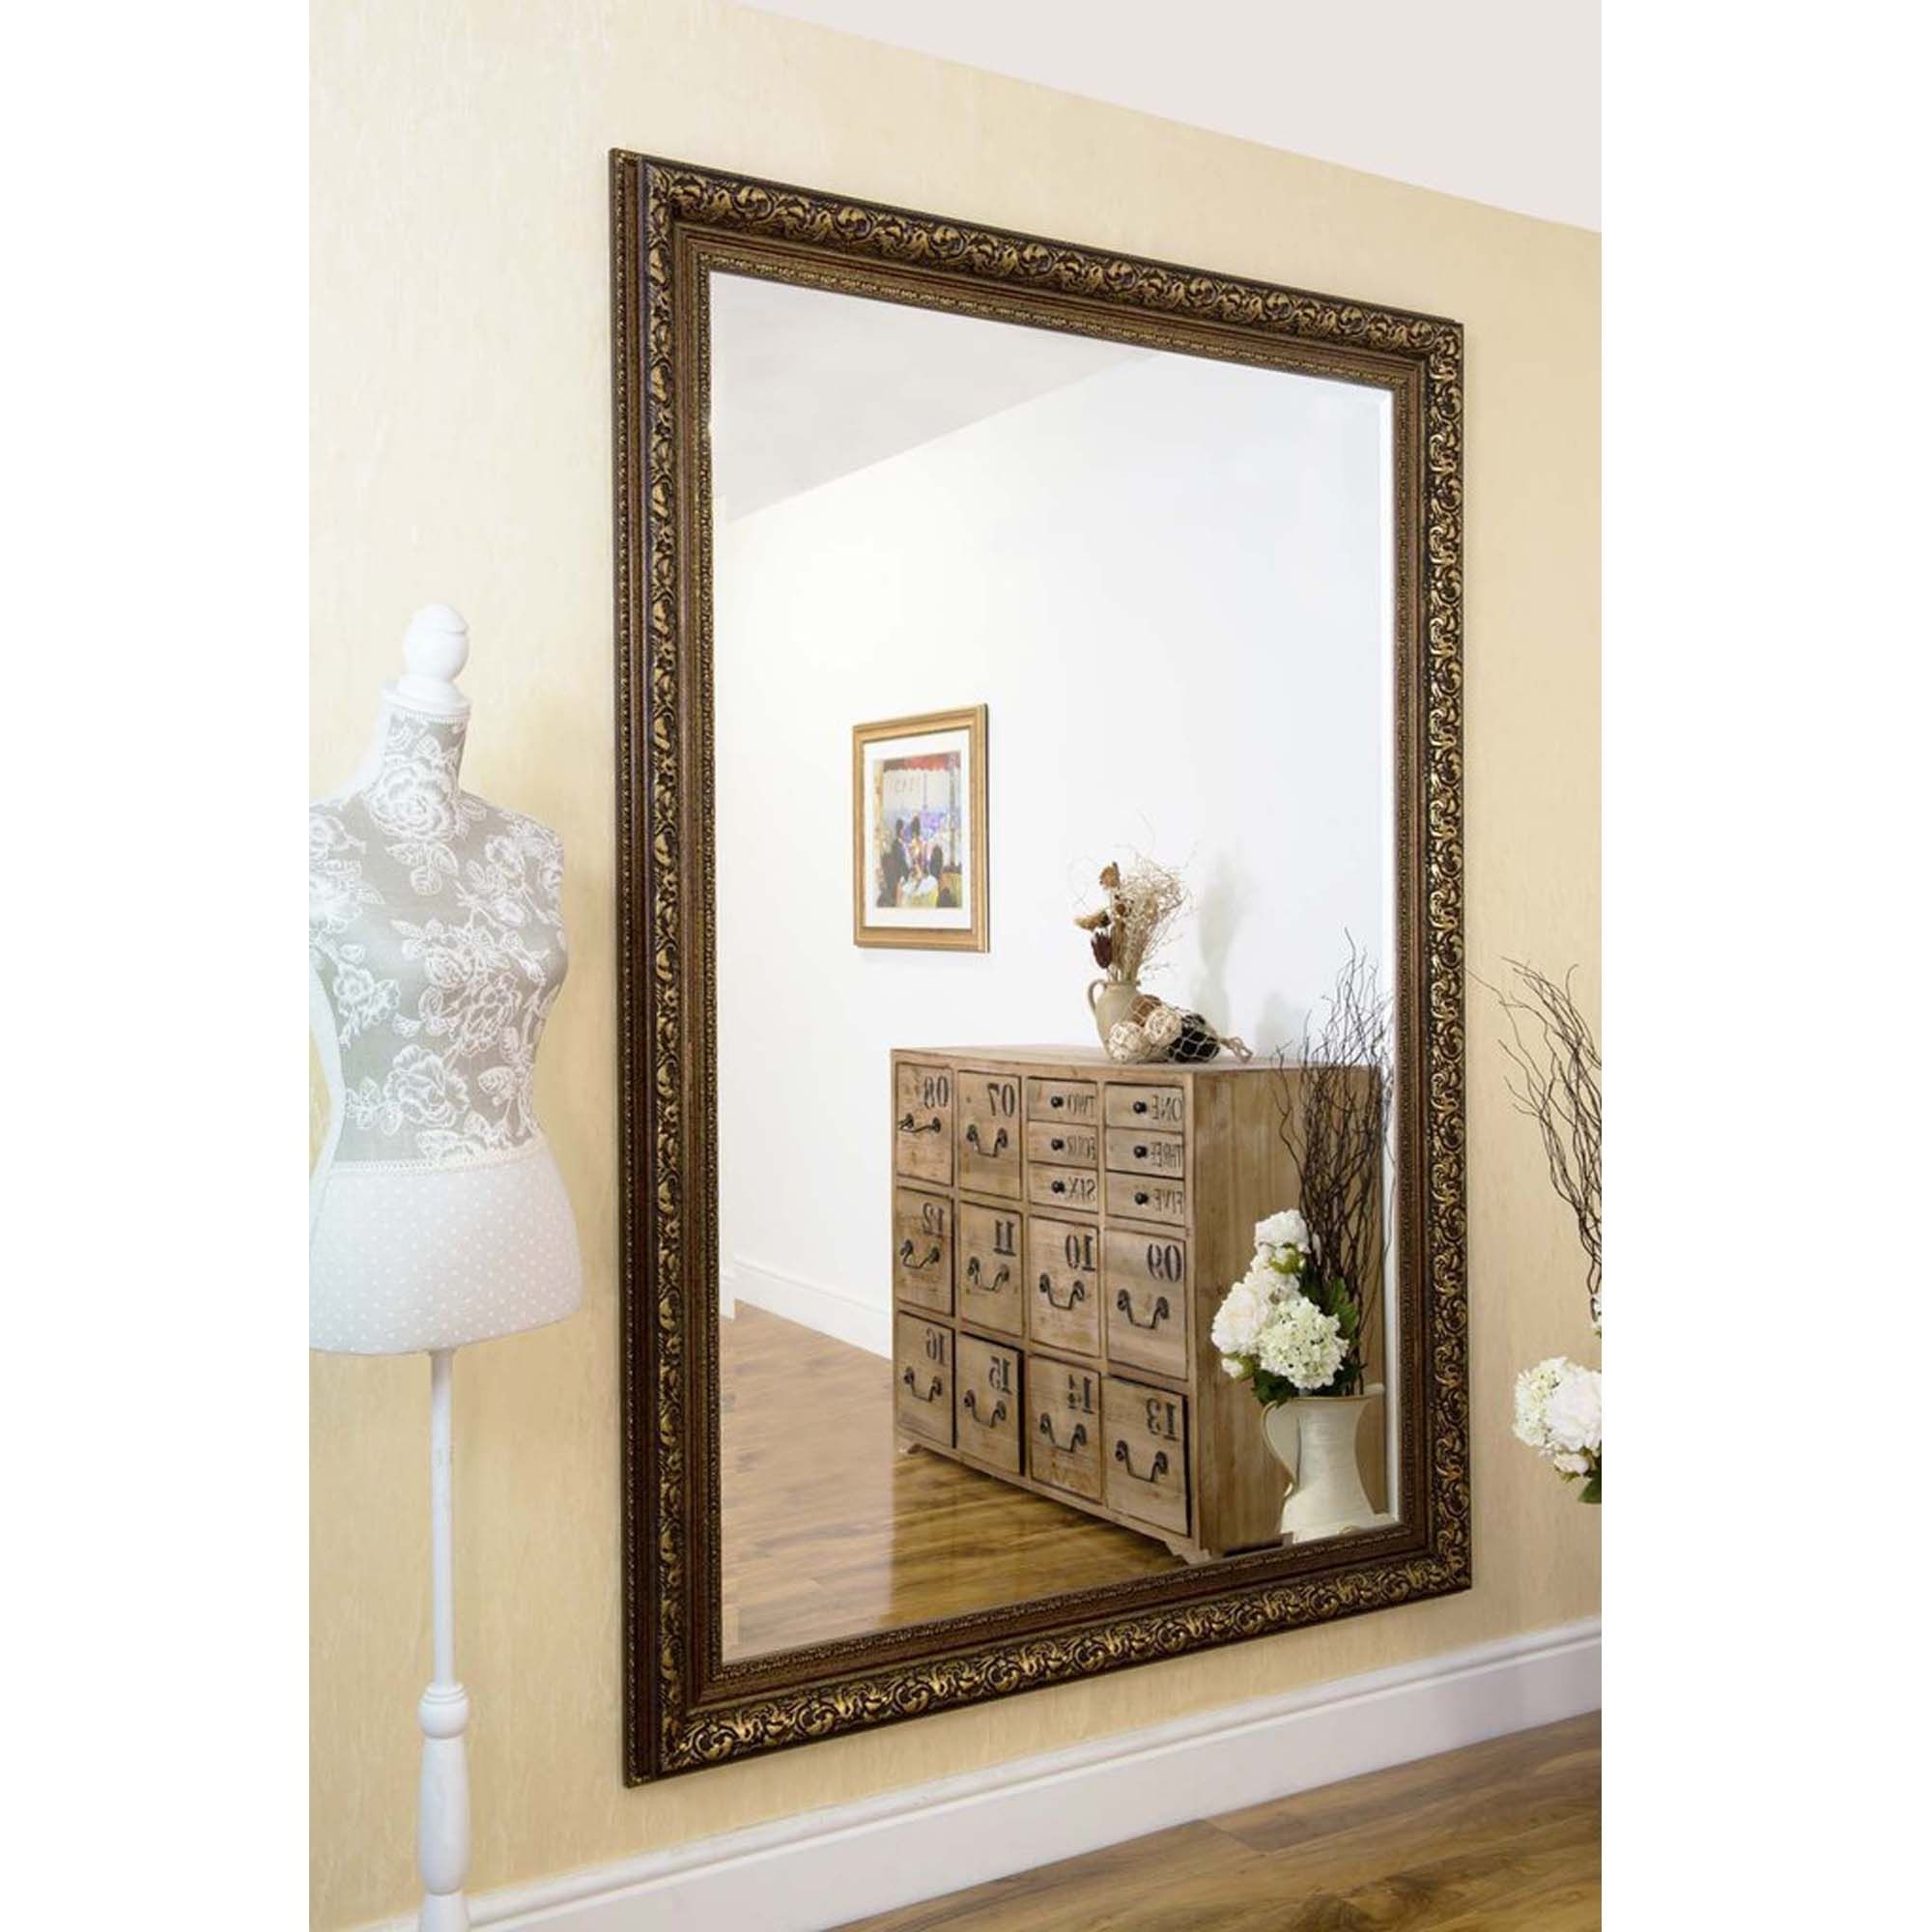 Large Rectangular Antique French Style Bronze Wall Mirror | Hd365 Inside French Brass Wall Mirrors (View 12 of 15)